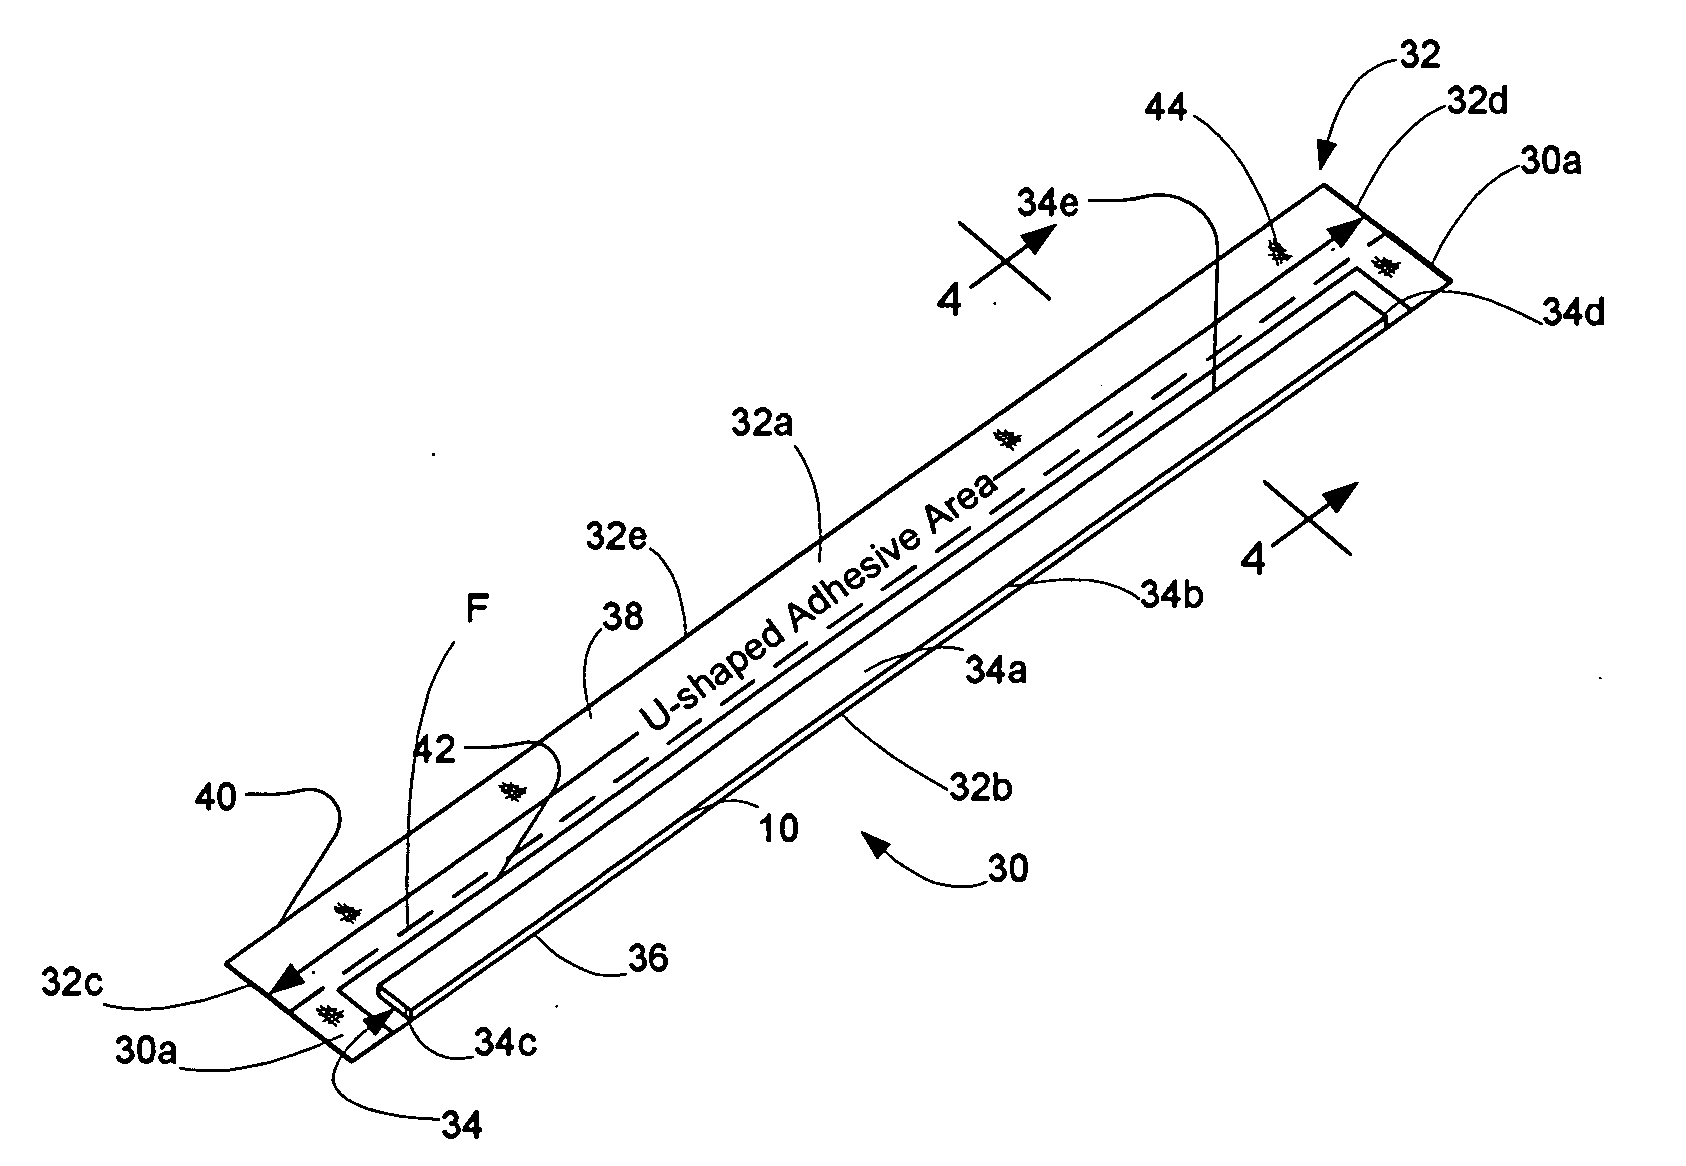 Reinforced Doctor Blade Assembly Seal and Printer Cartridge Employing the Reinforced Seal